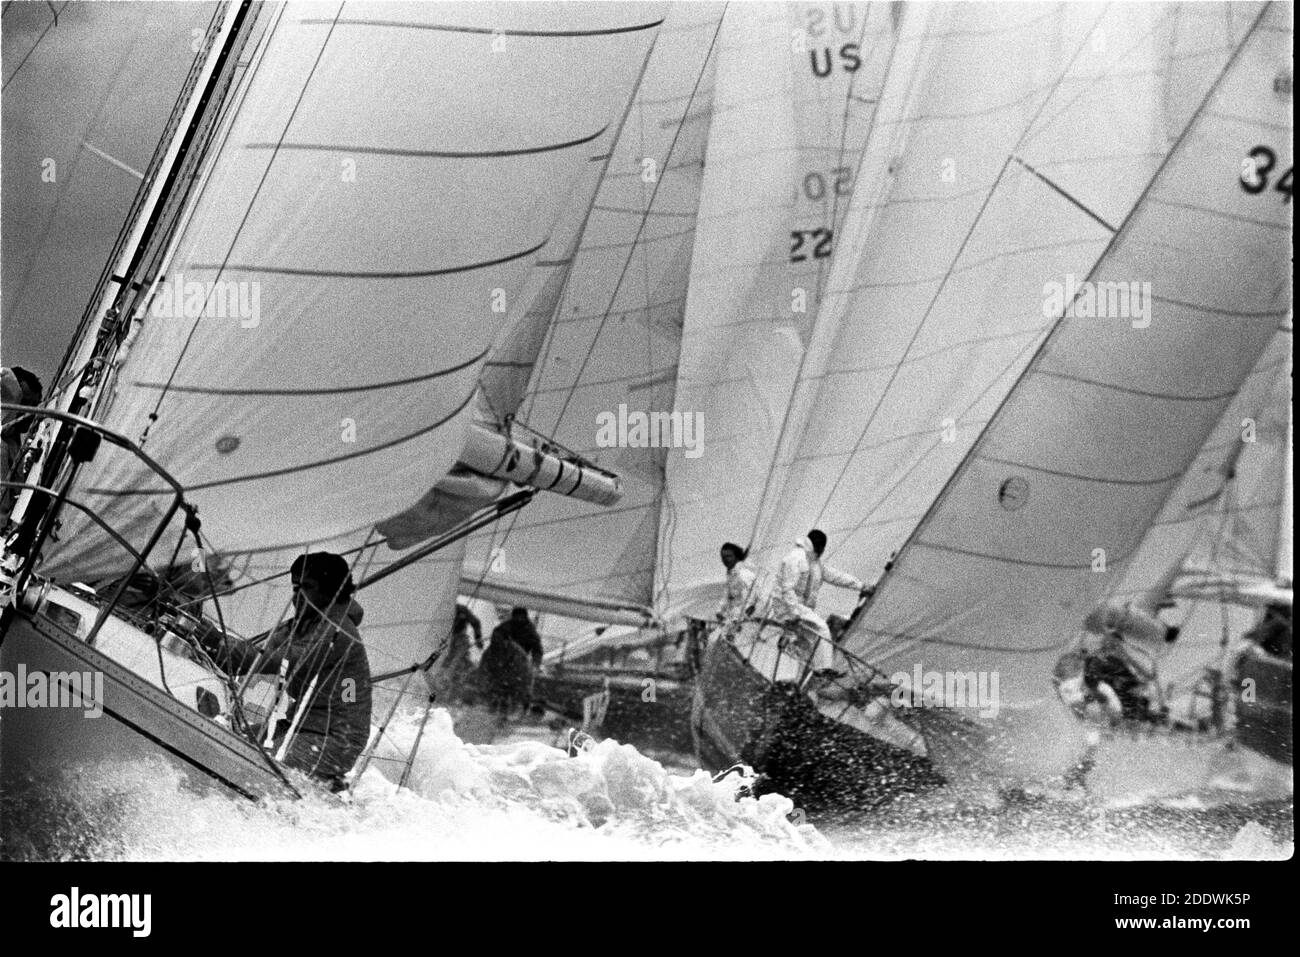 AJAXNETPHOTO. JULY,1979. COWES, ENGLAND. - ADMIRAL'S CUP -  START OF THE FIRST INSHORE RACE ON THE ROYAL YACHT SQUADRON LINE OFF COWES. PHOTO:JONATHAN EASTLAND/AJAX REF:7902081 5 Stock Photo